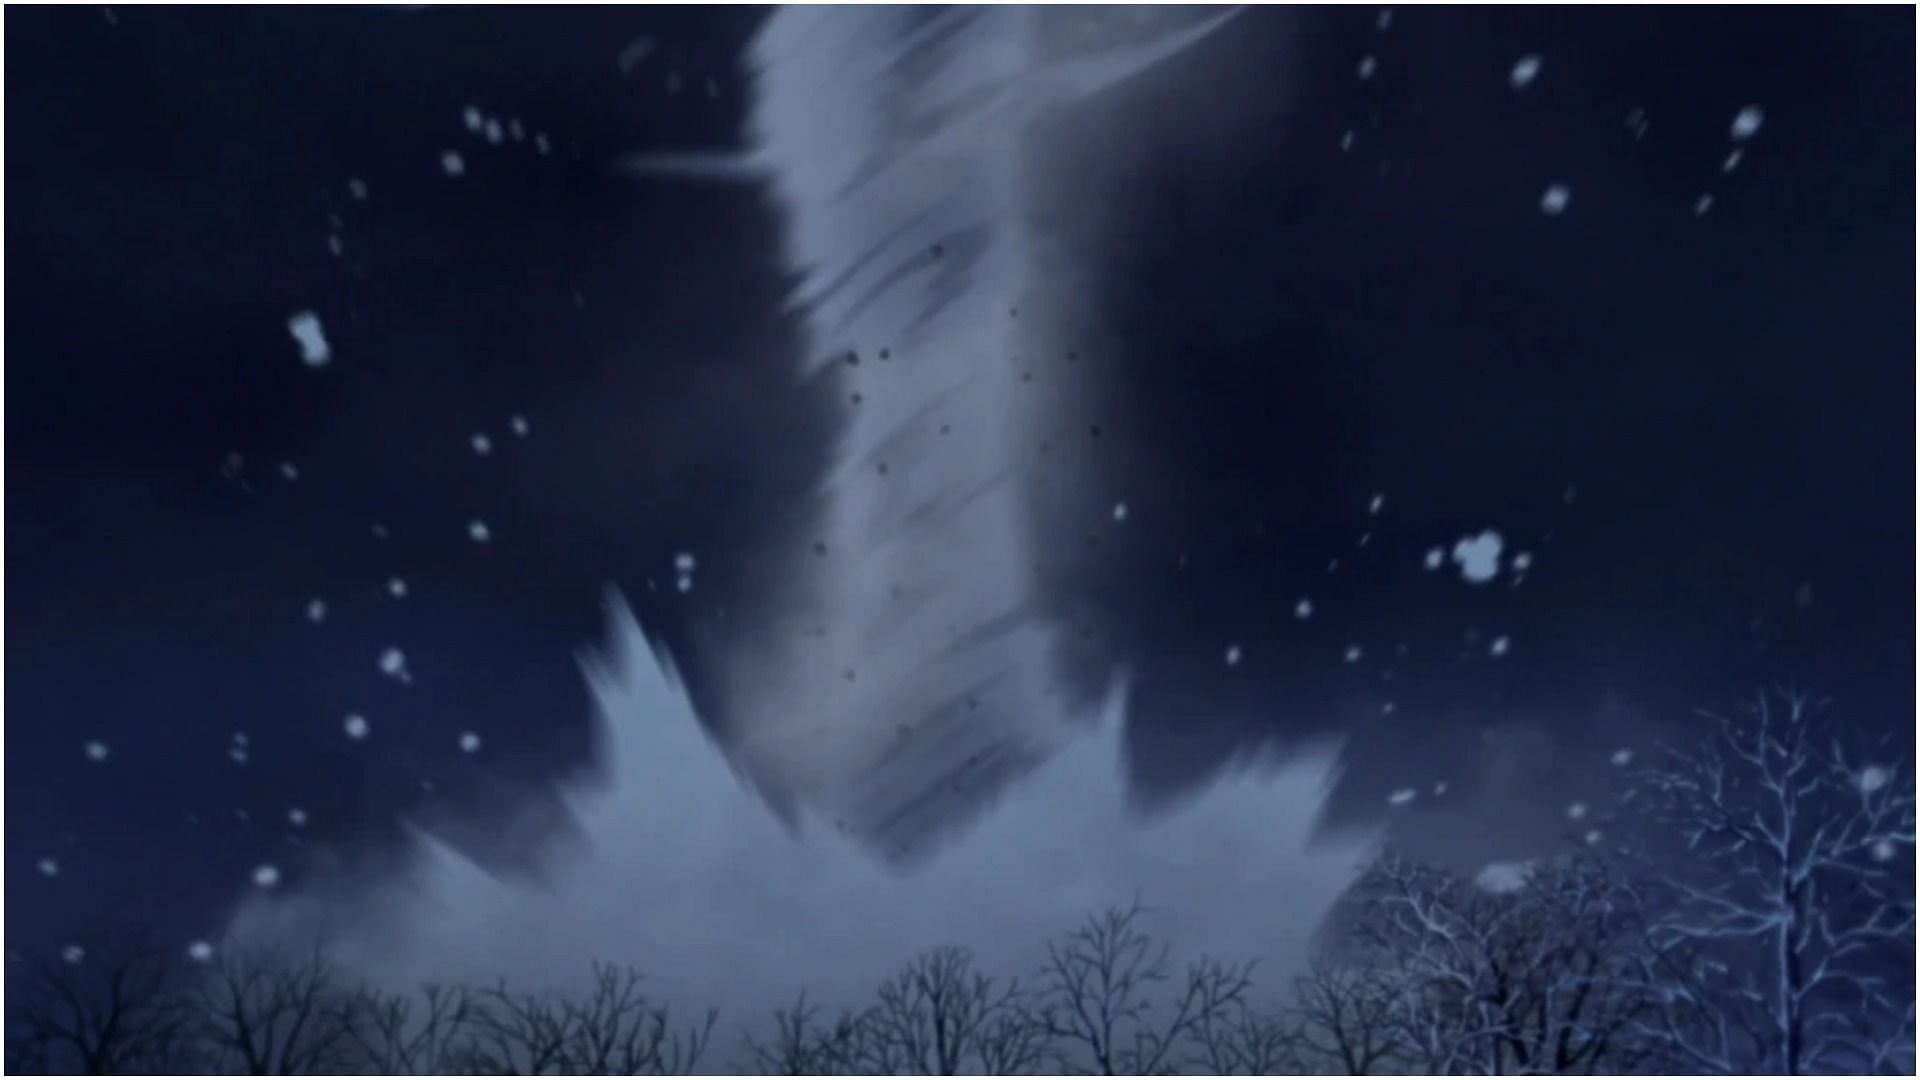 Typhoon Release: Great Consecutive Bursting Extreme Winds as seen in the anime Naruto (Image via Studio Pierrot)